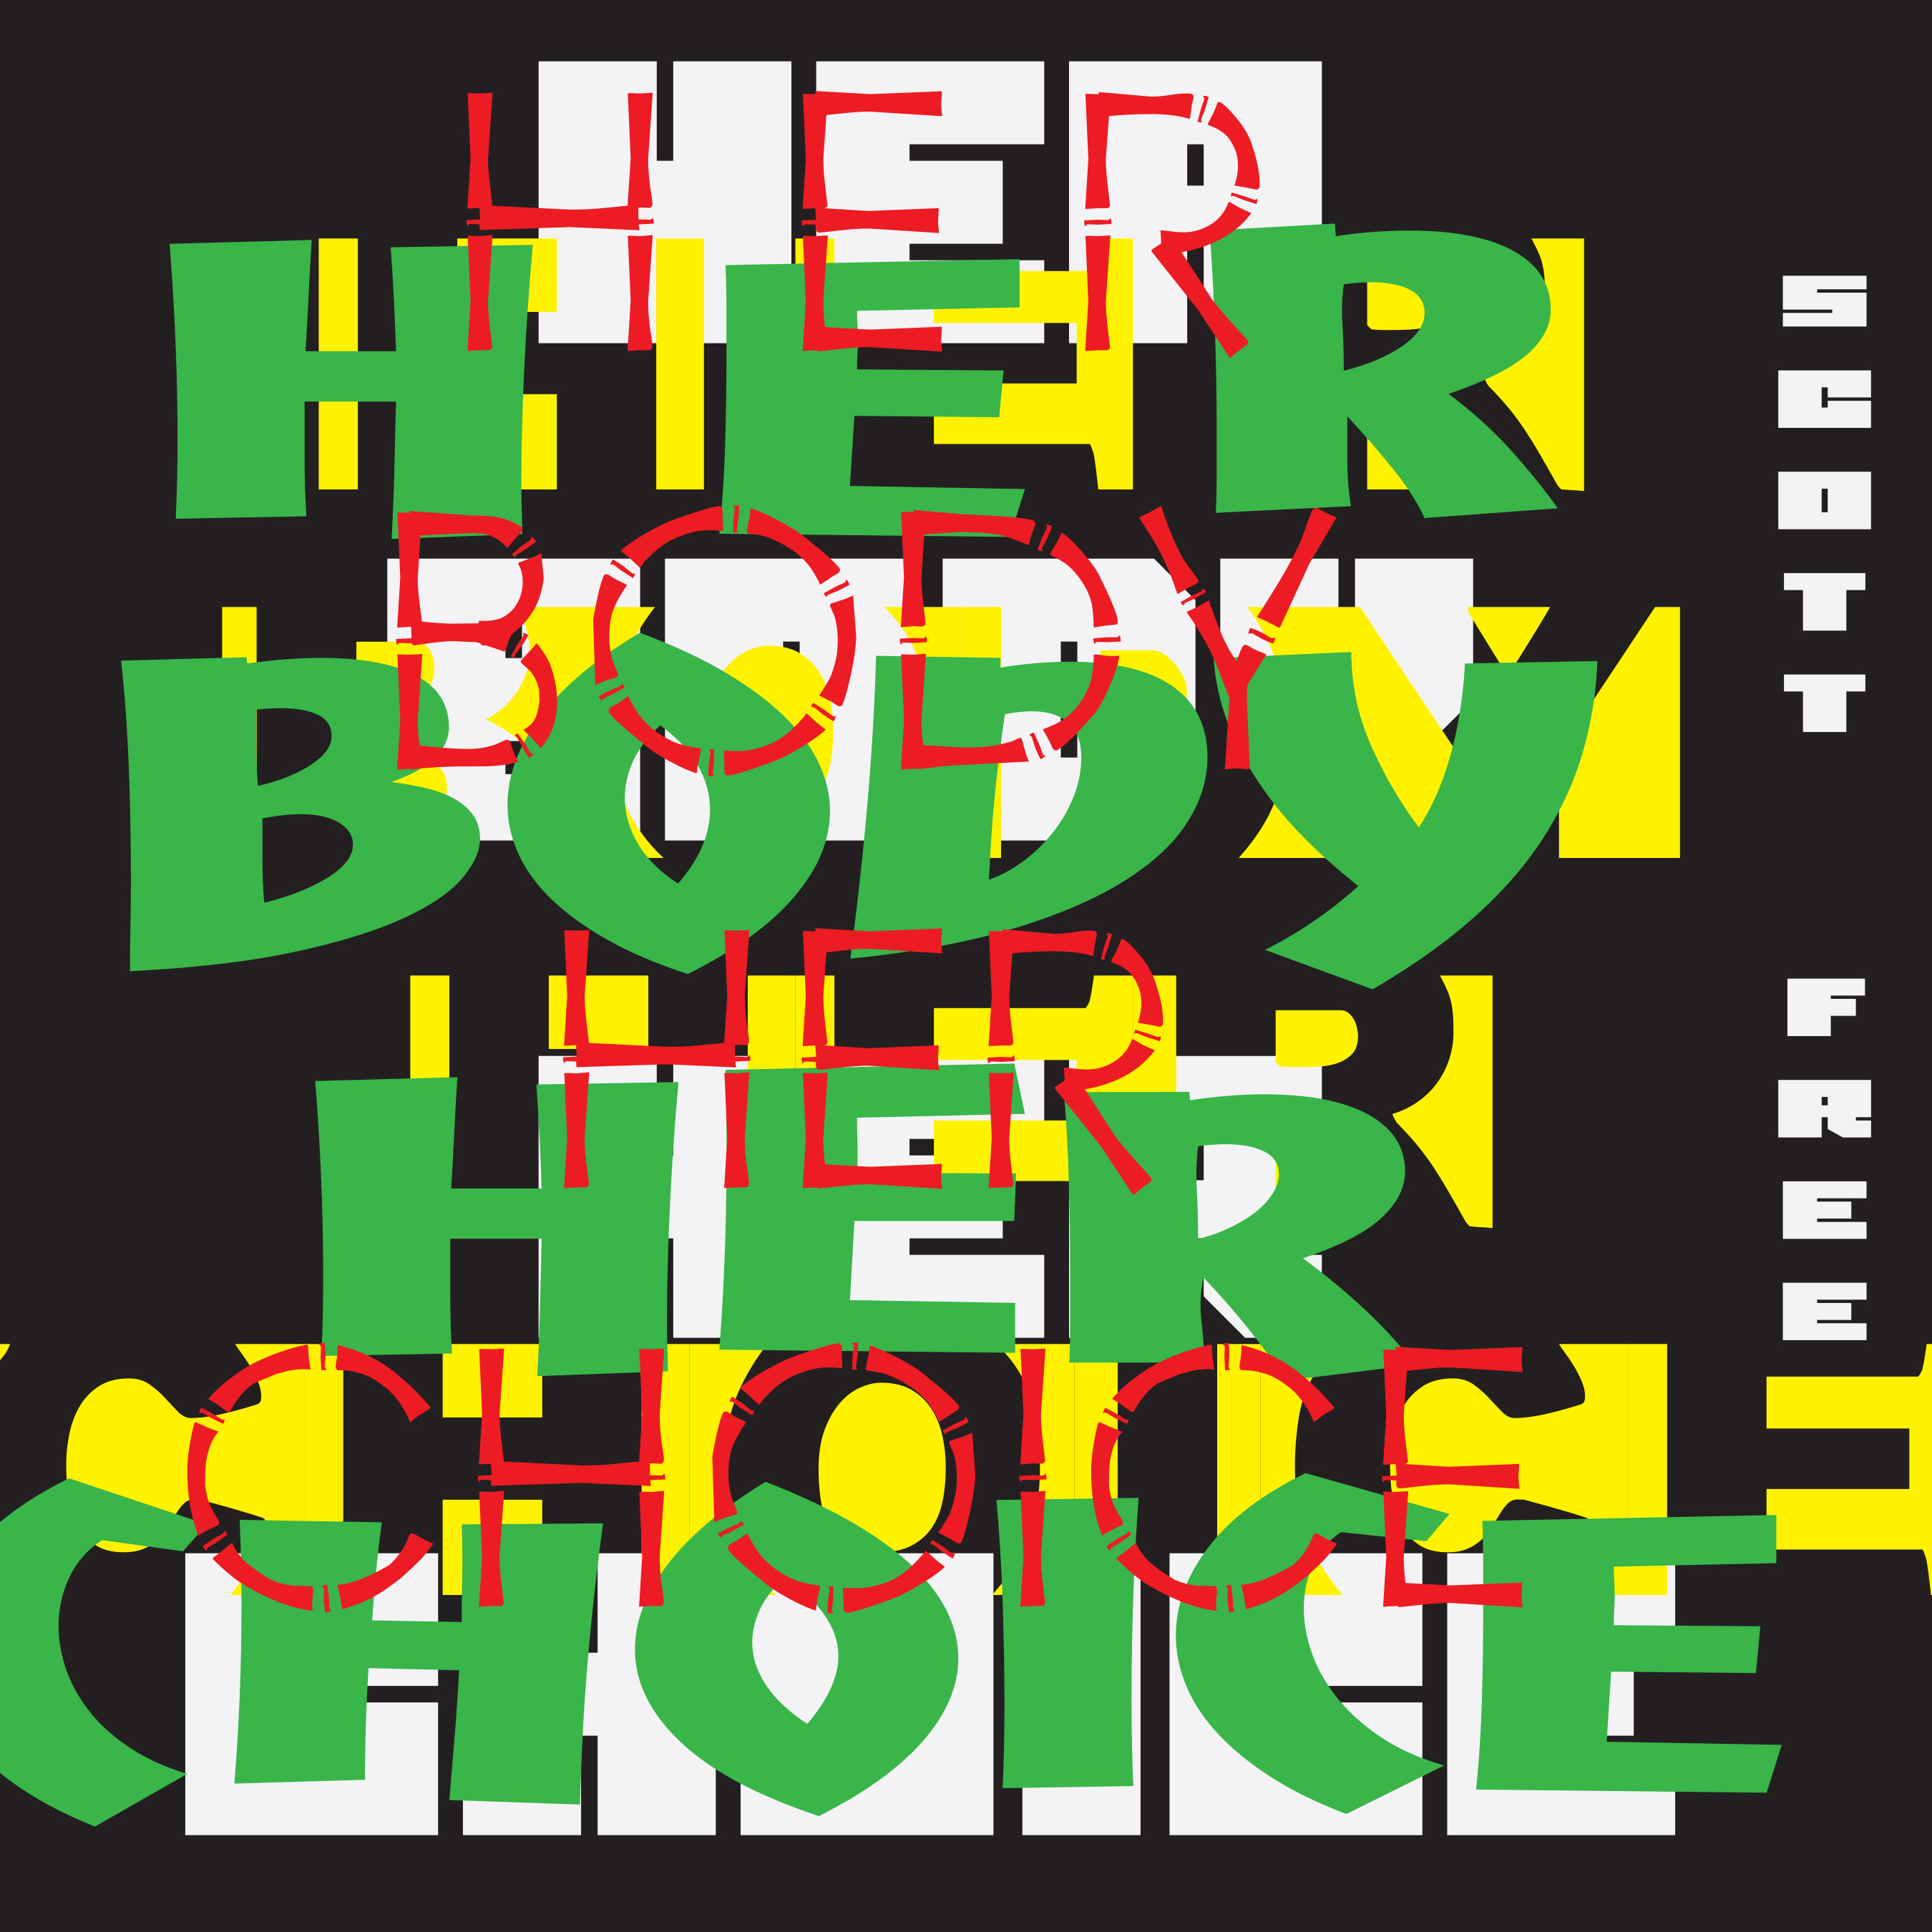 Her Body Her Choice